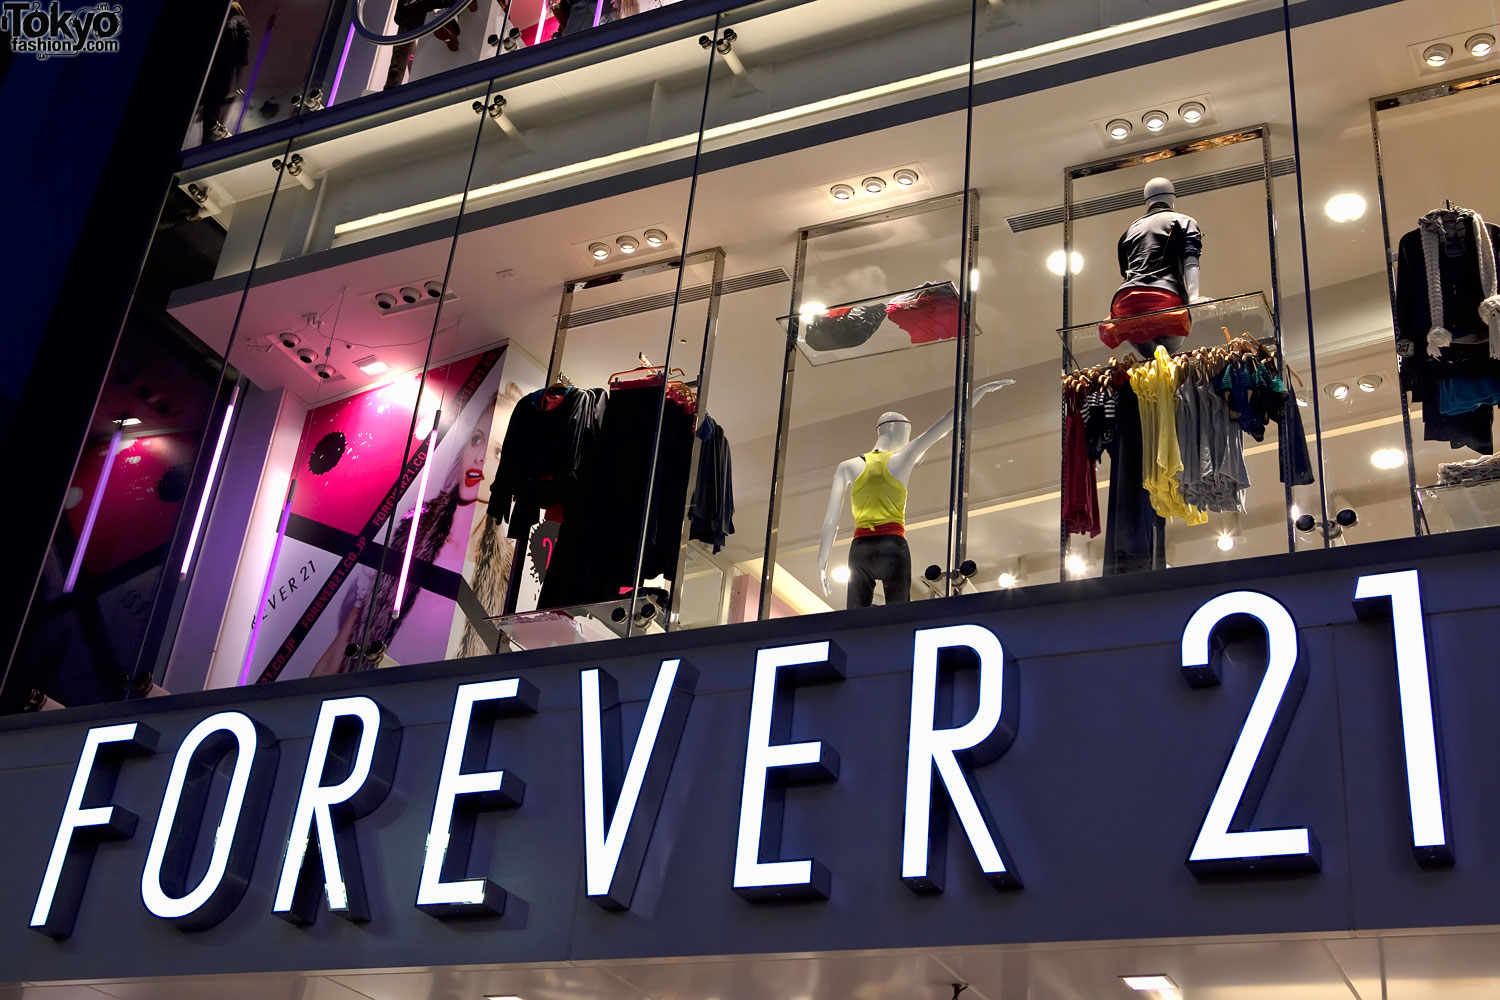 Forever 21 to close all stores, online shop in Japan by late Oct